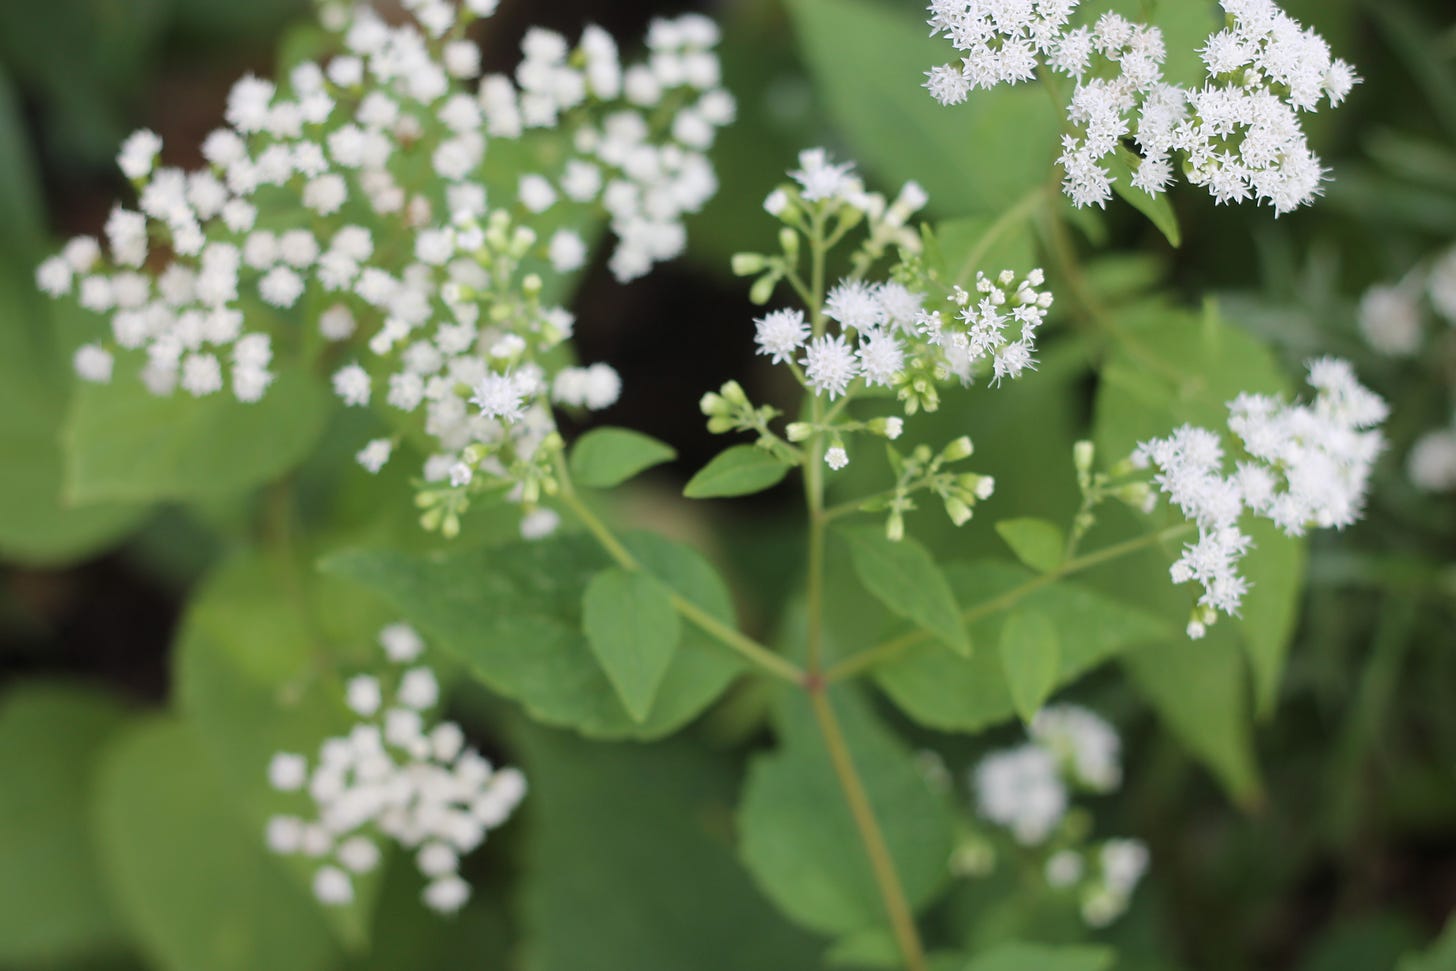 Clusters of small, white, almost spiky flowers set against green leaves.